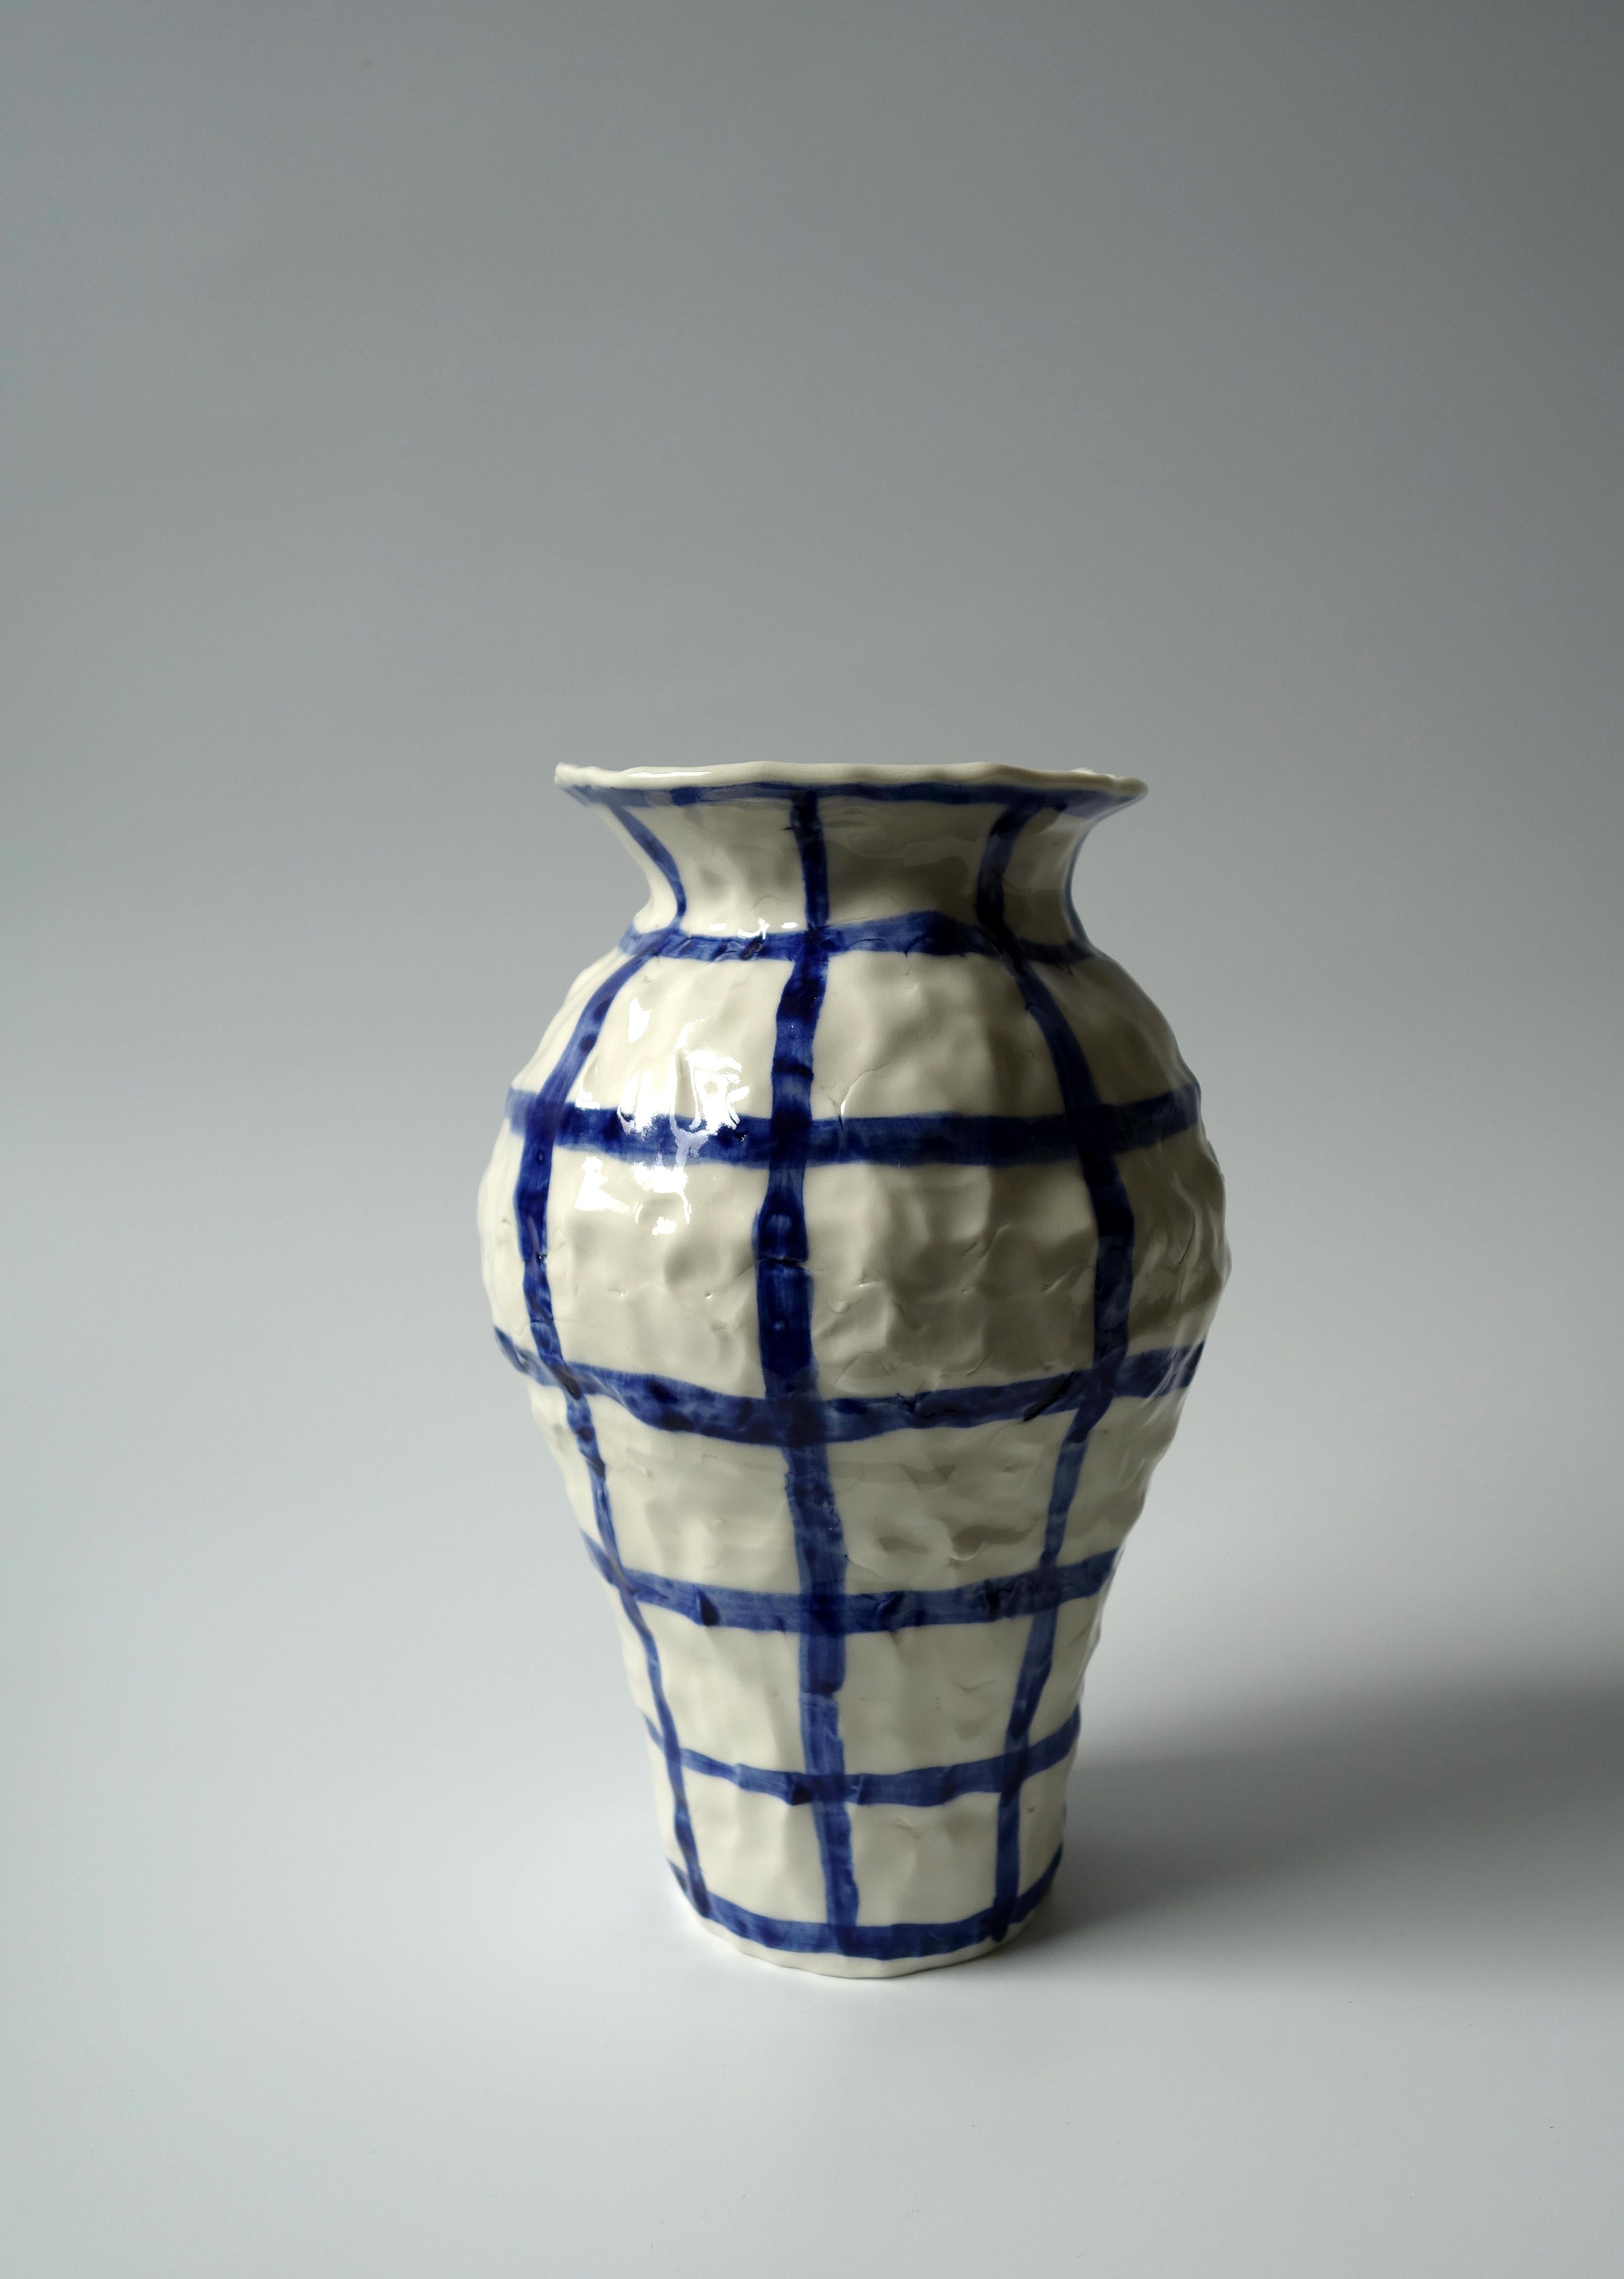 Vase with checkers by Caroline Harrius
Dimensions: 22 H cm
Material: Porcelain

Vase with checkers, Also available: a few of these in different sizes and some with different patterns. They are colied in porcelain and glazed on the inside. Sizes